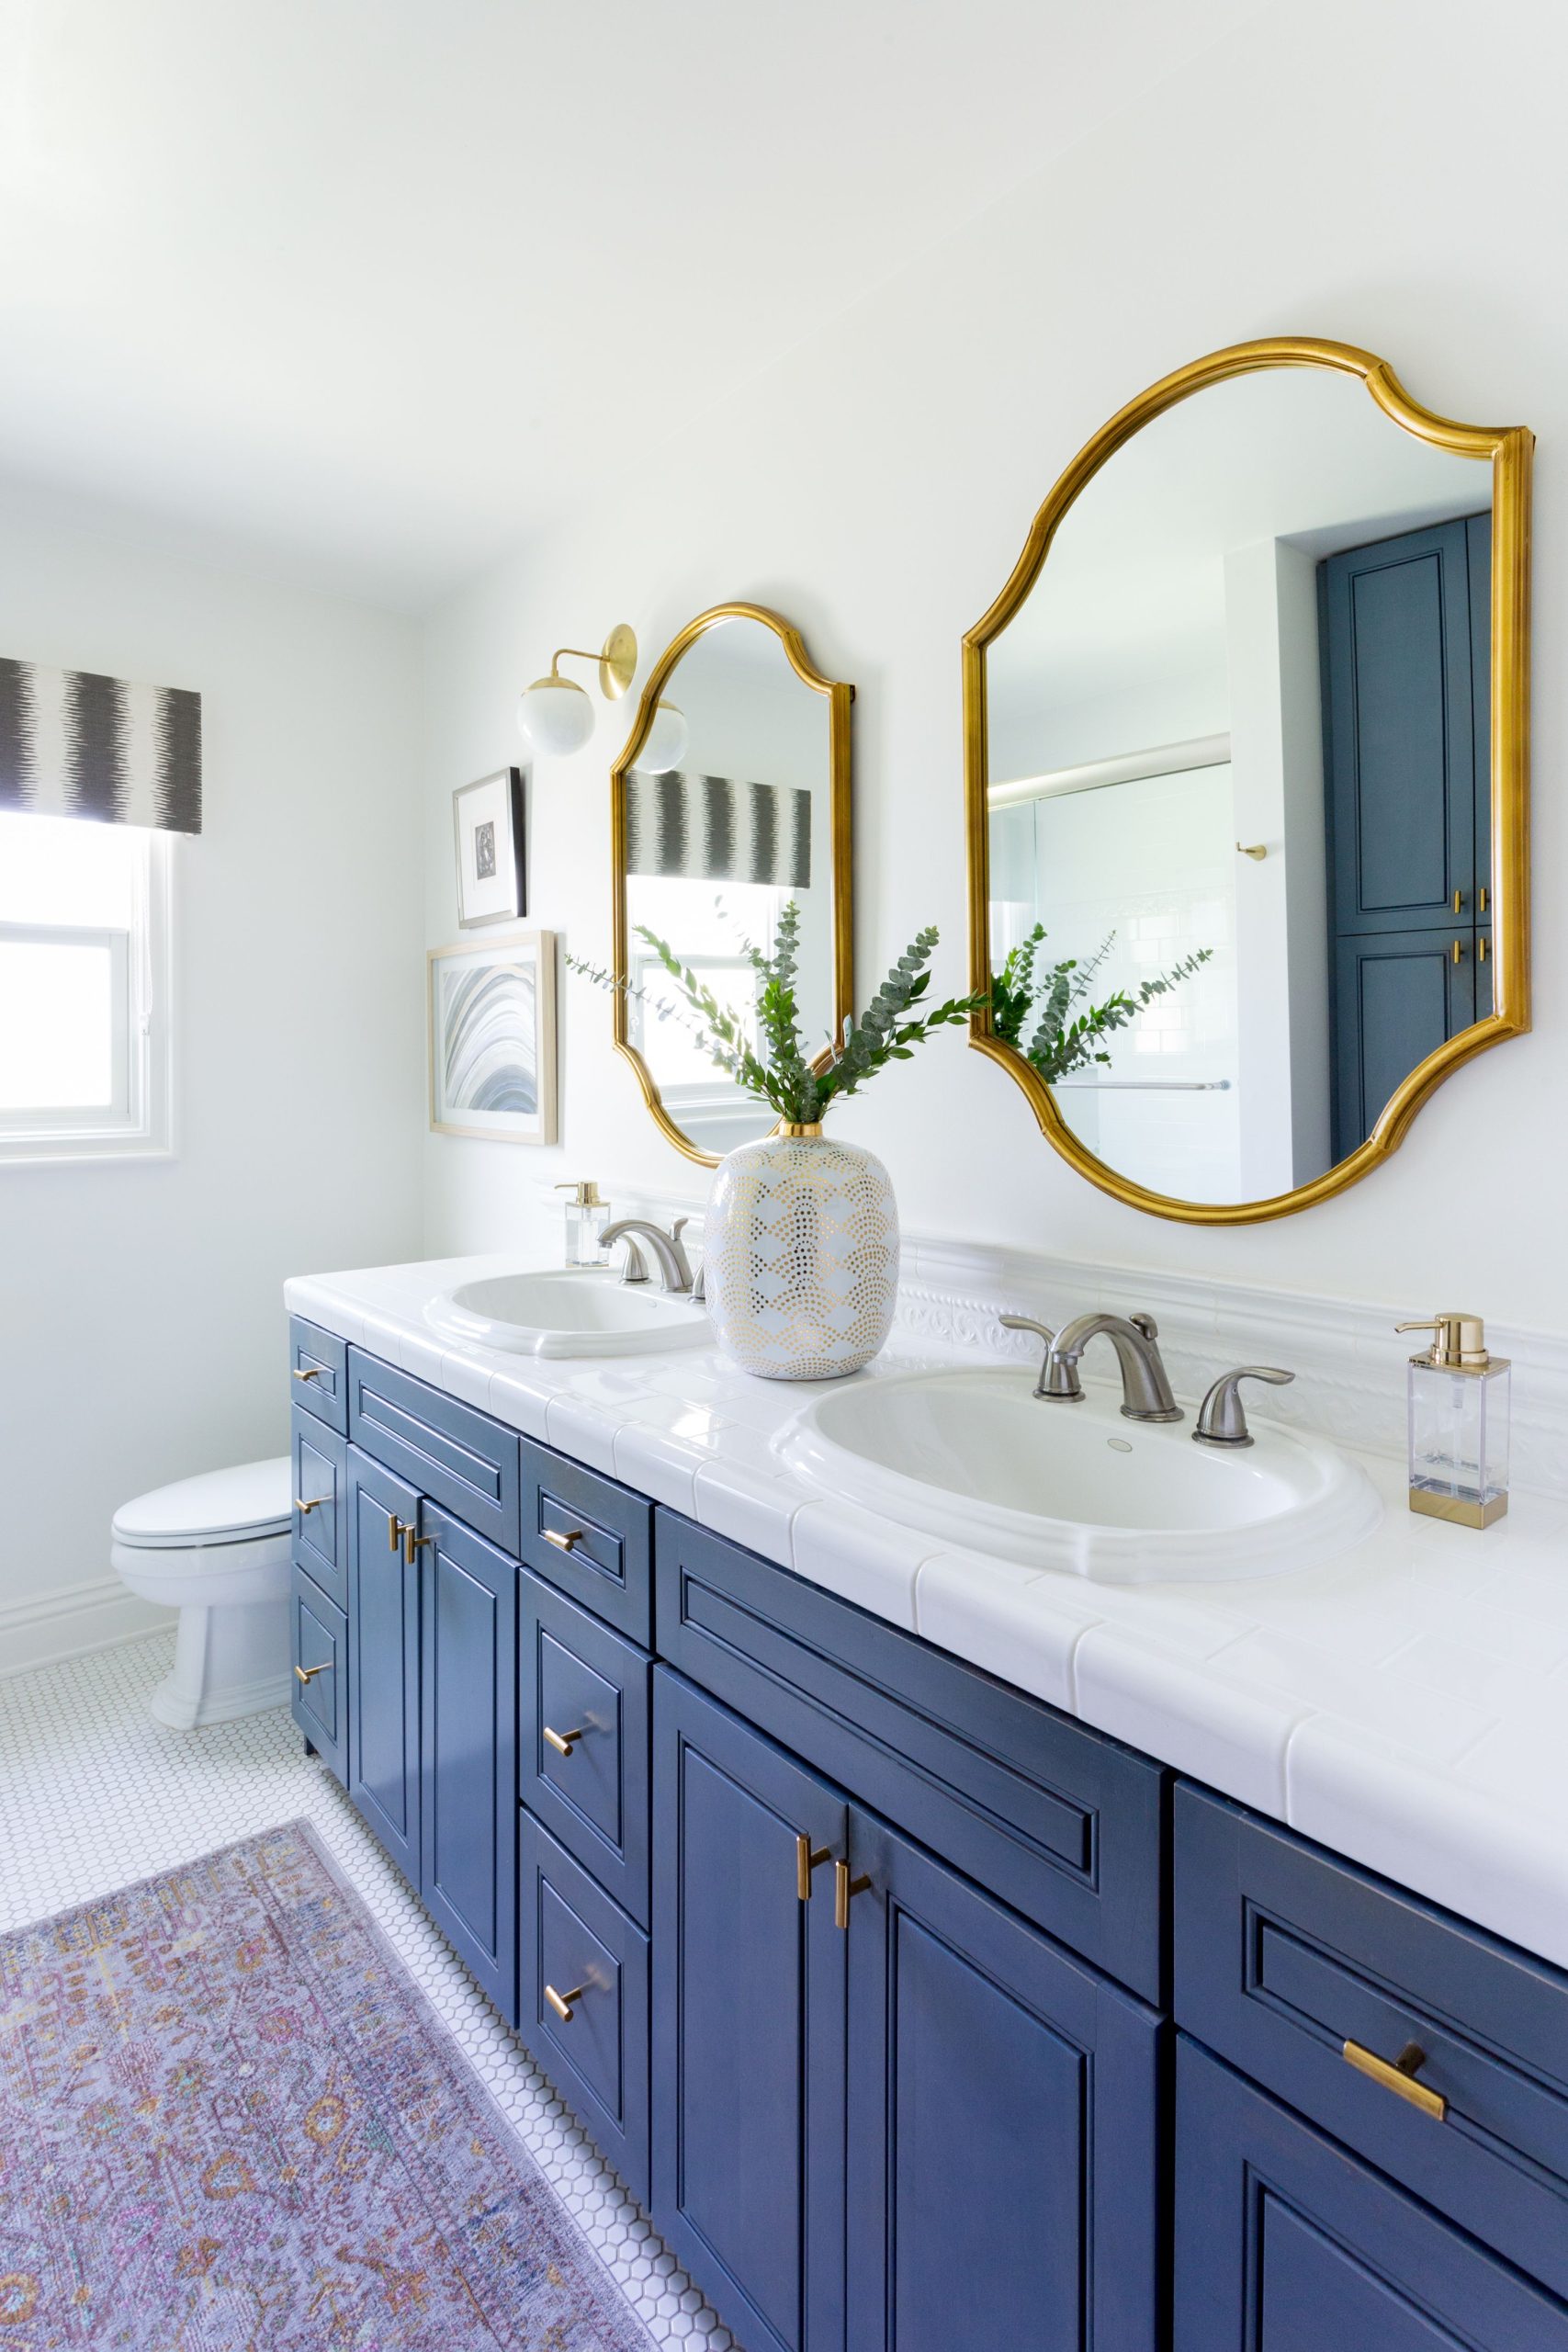 Blue and white bathroom + gold framed mirrors + his and her sinks